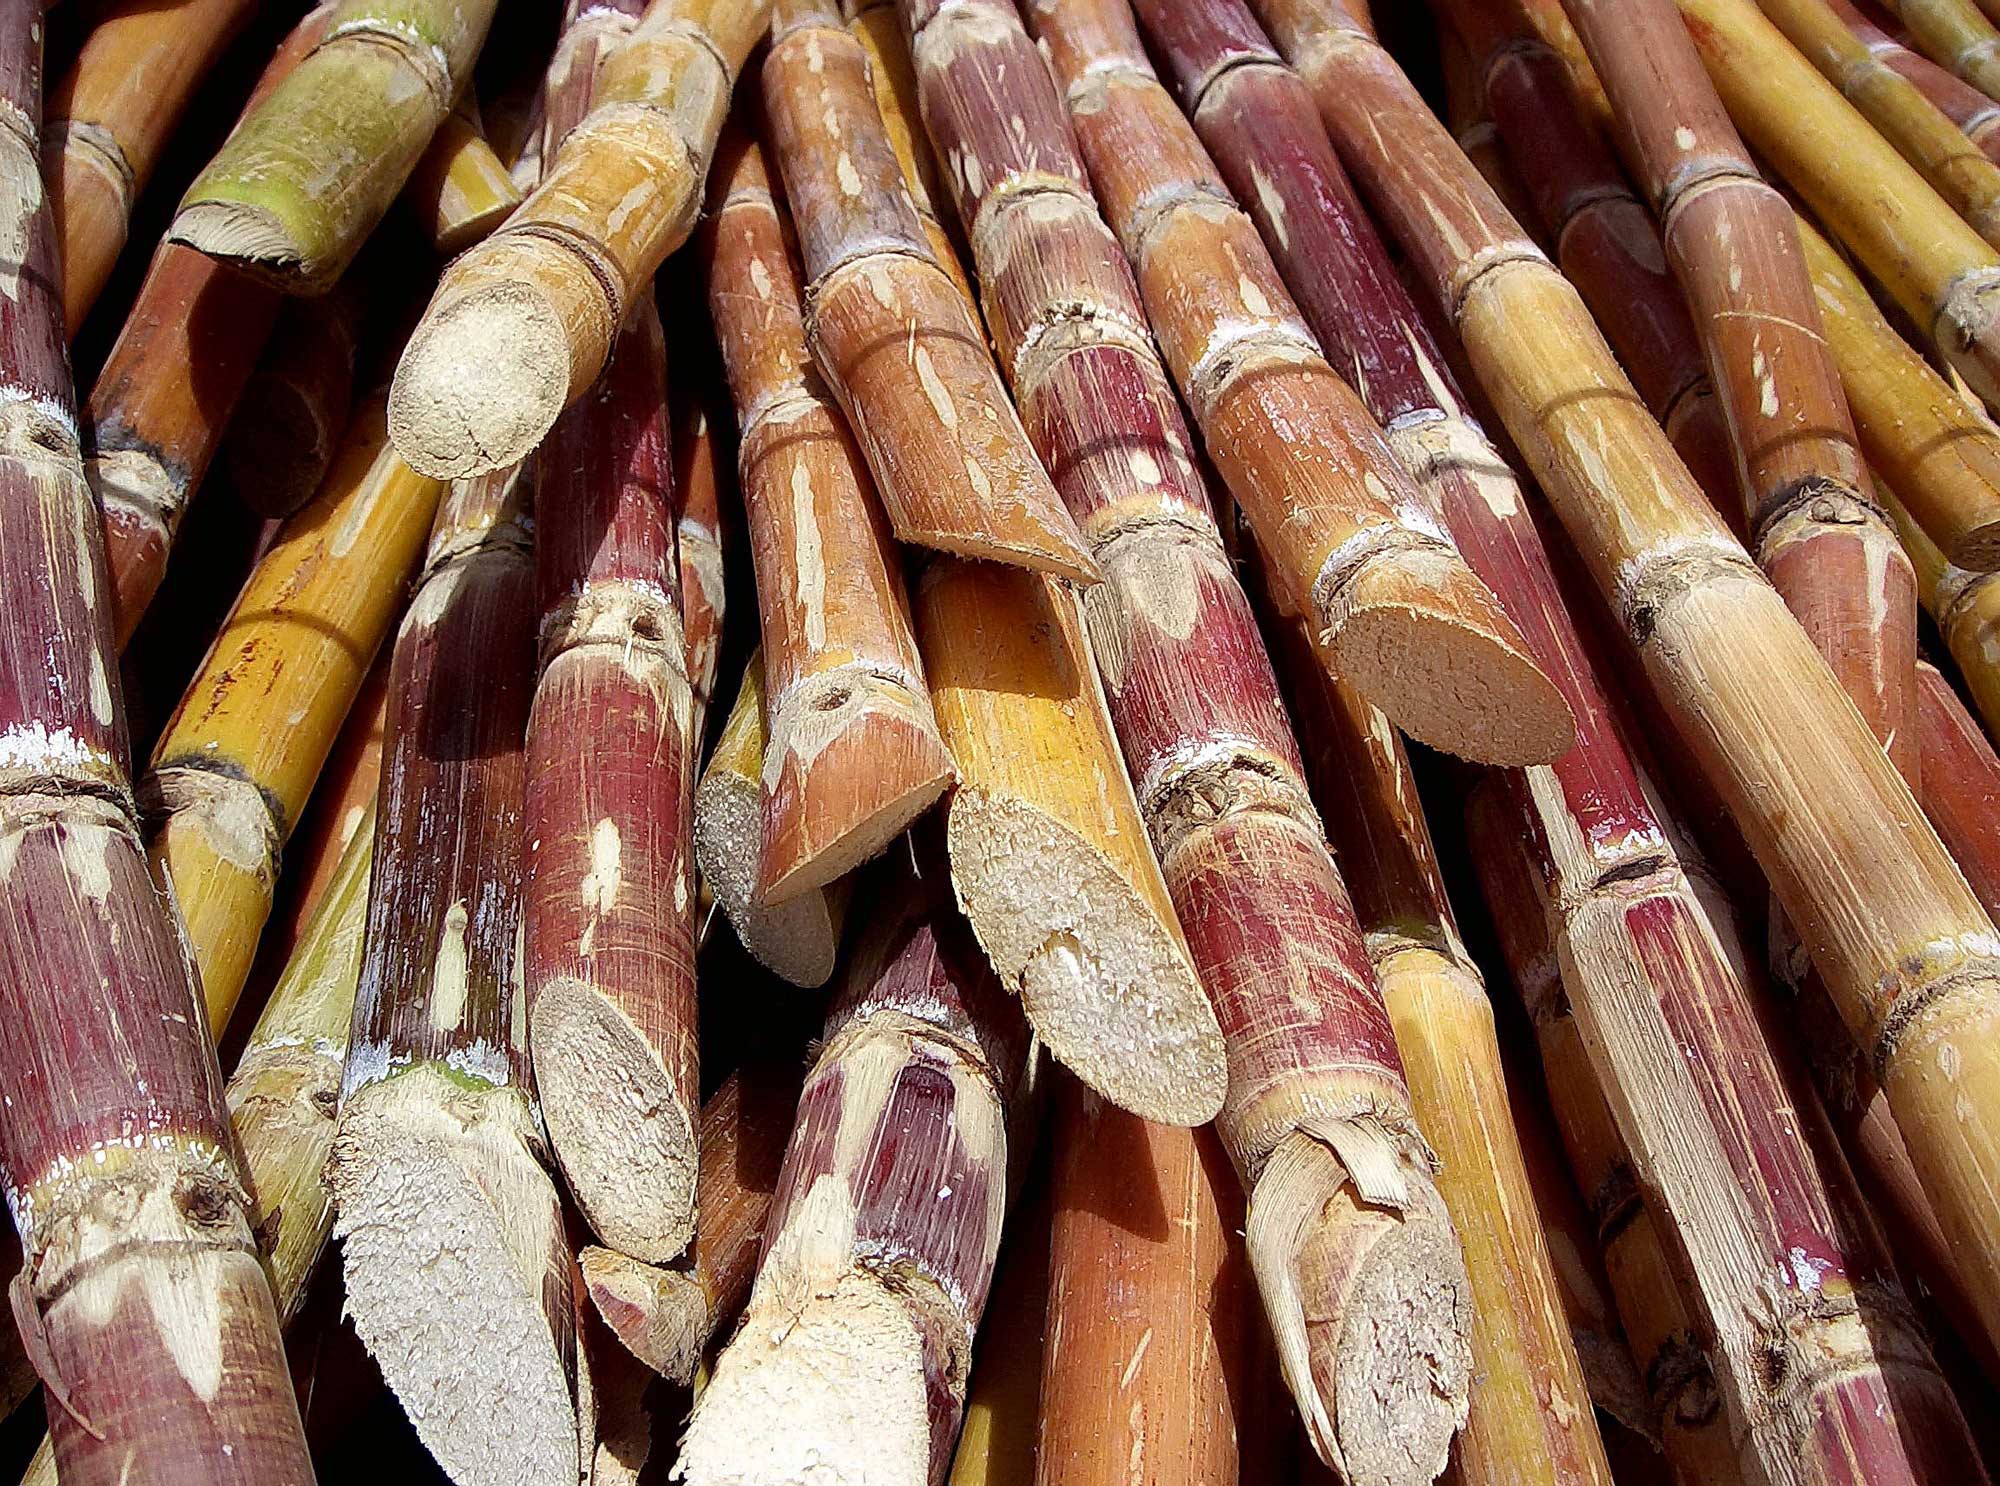 Photograph of a pile of cut sugar cane stalks showing that the centers of the stem are solid in the internodal regions.